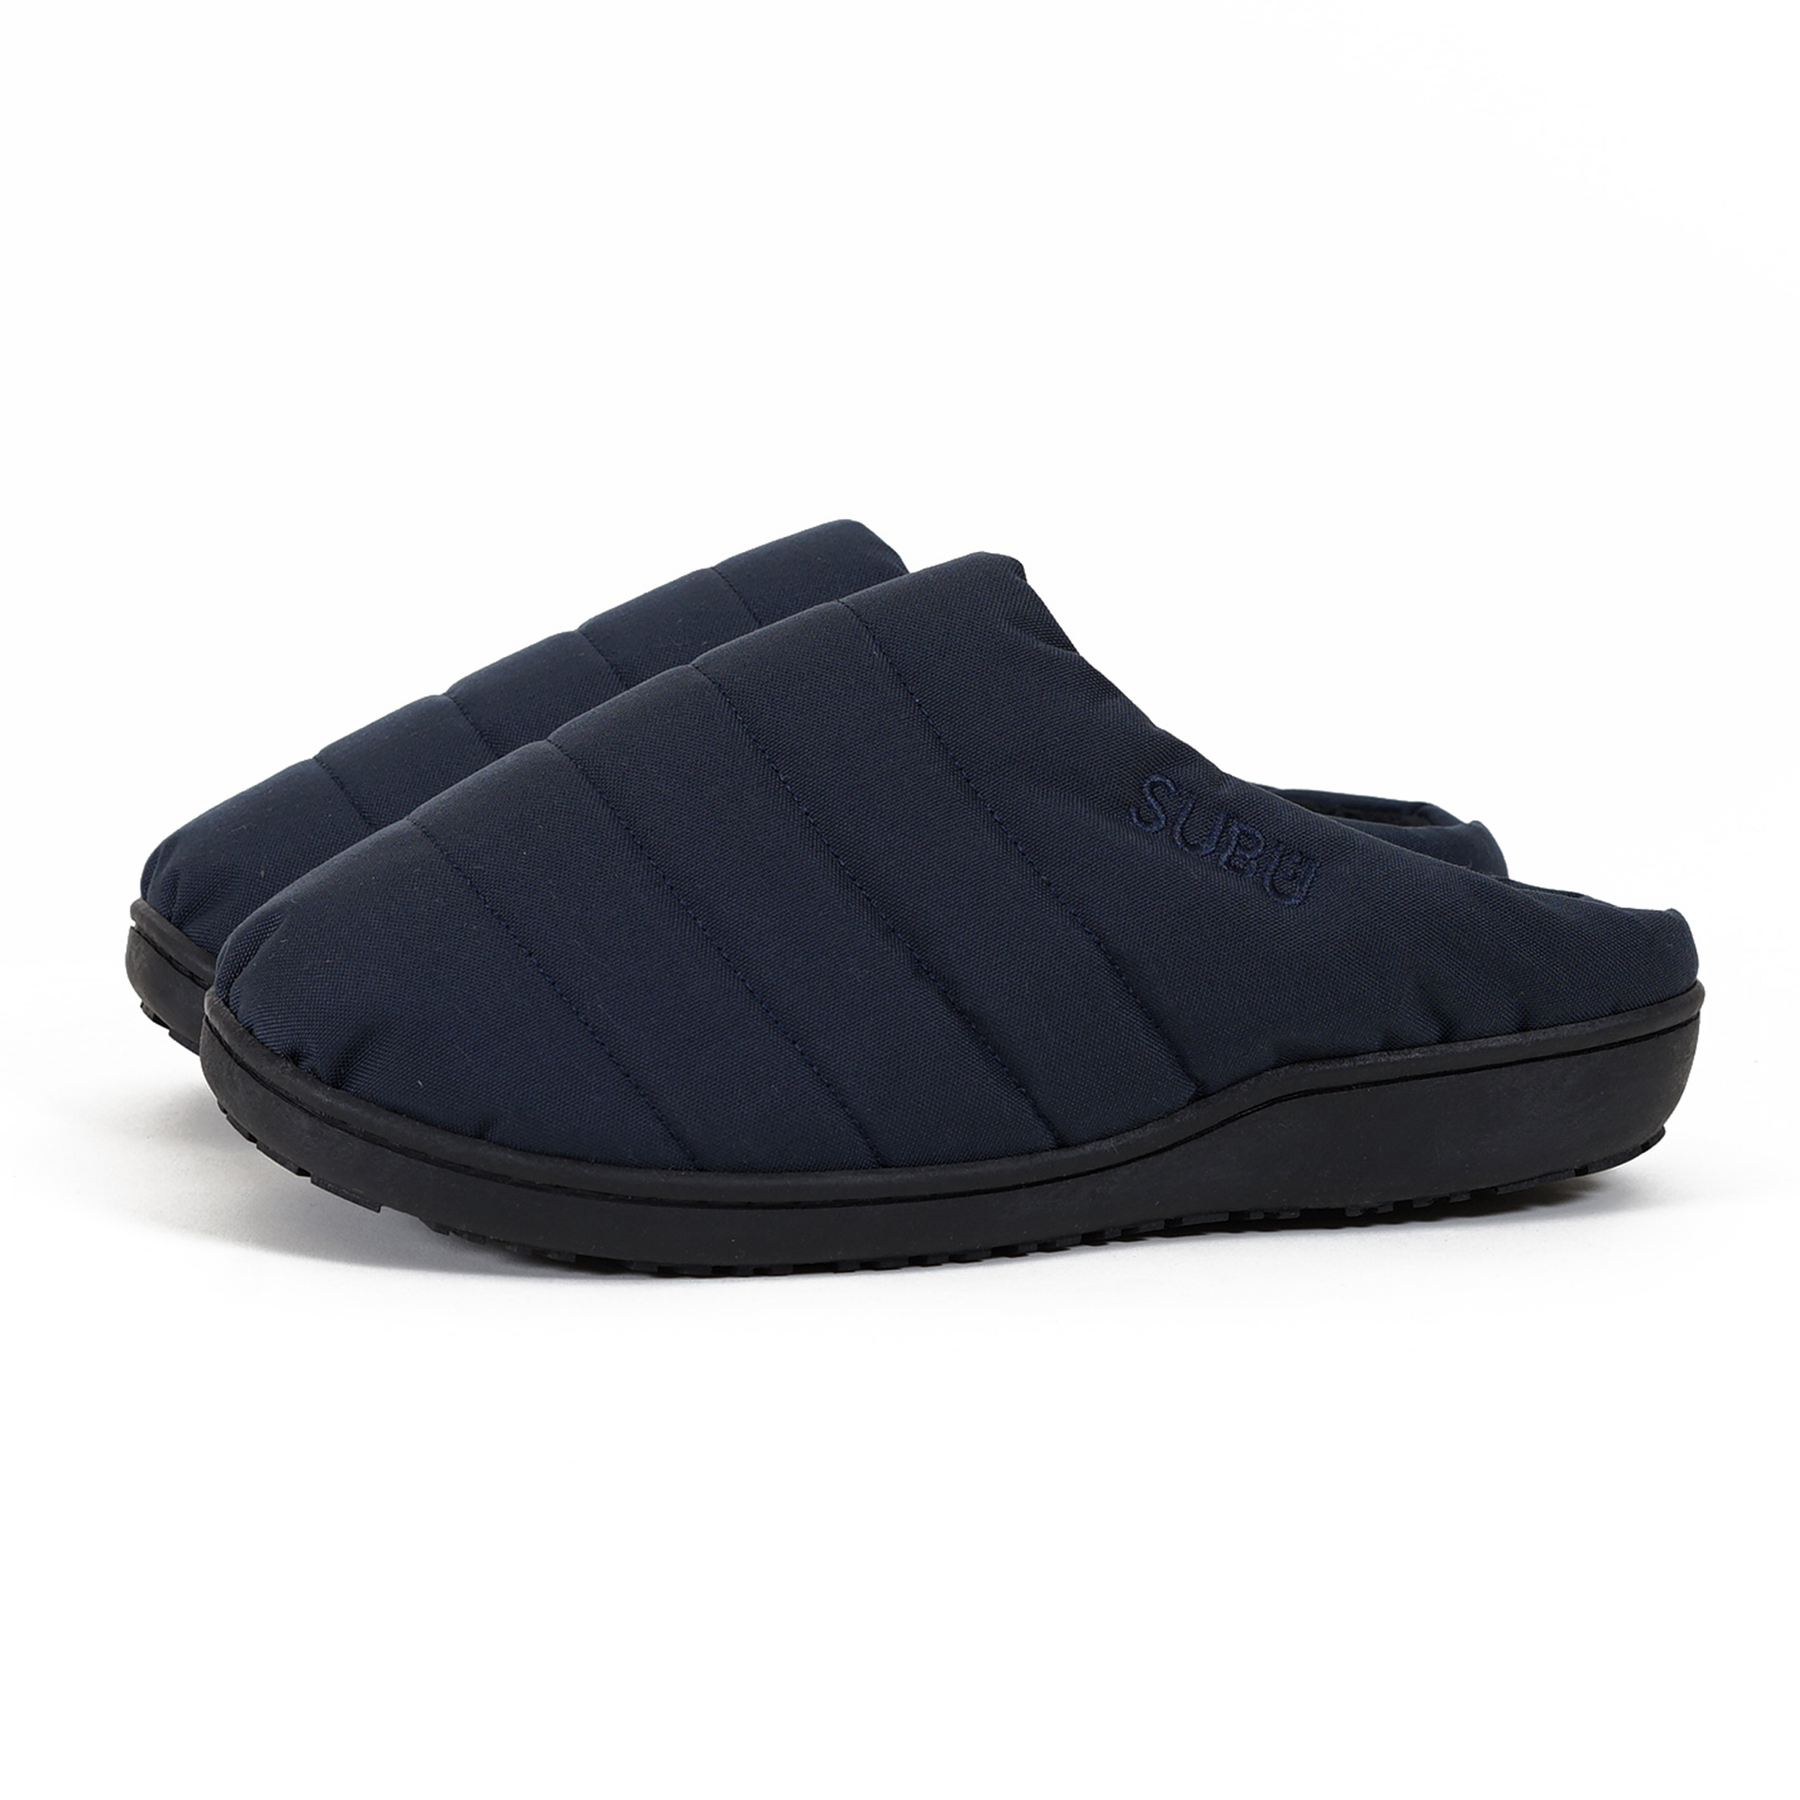 SUBU, Nannen Outdoor Slippers Navy, Size, 2, Slippers,